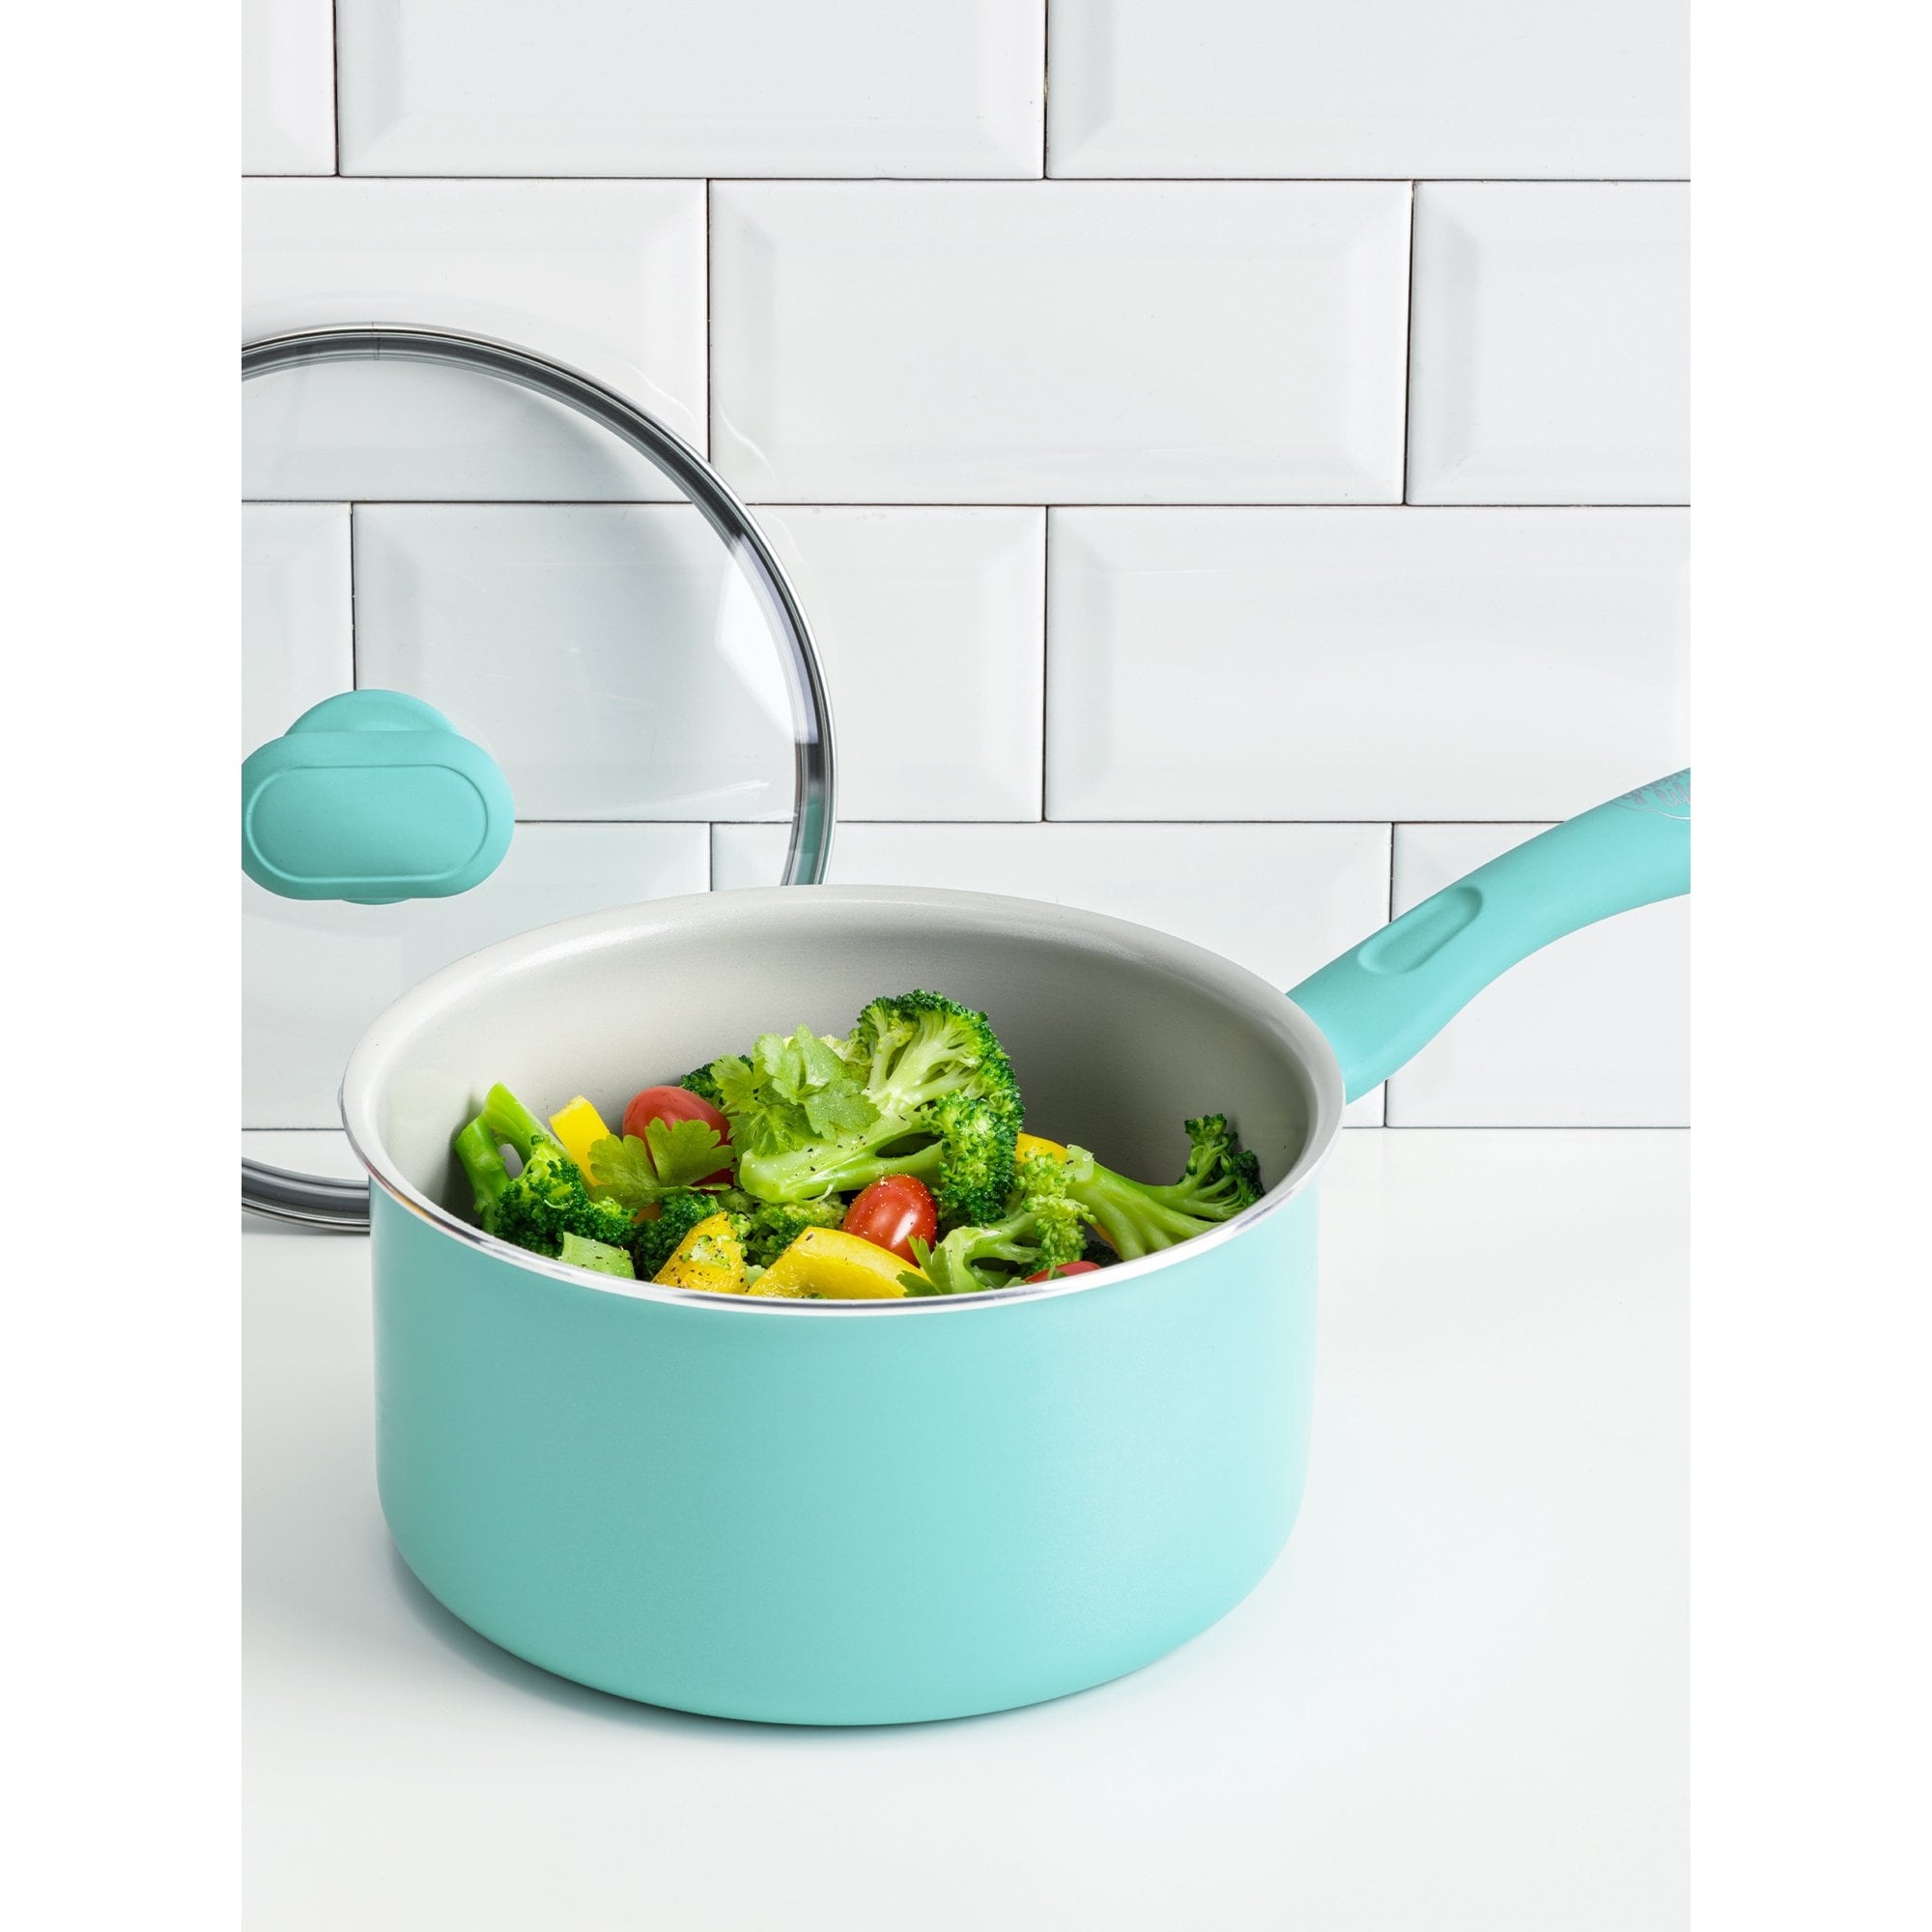 https://ak1.ostkcdn.com/images/products/is/images/direct/c4ff535af6be52cc925c46765f327536339233d5/Diamond-Ceramic-Nonstick-Turquoise-2.5-Quart-Covered-Sauce-Pan.jpg